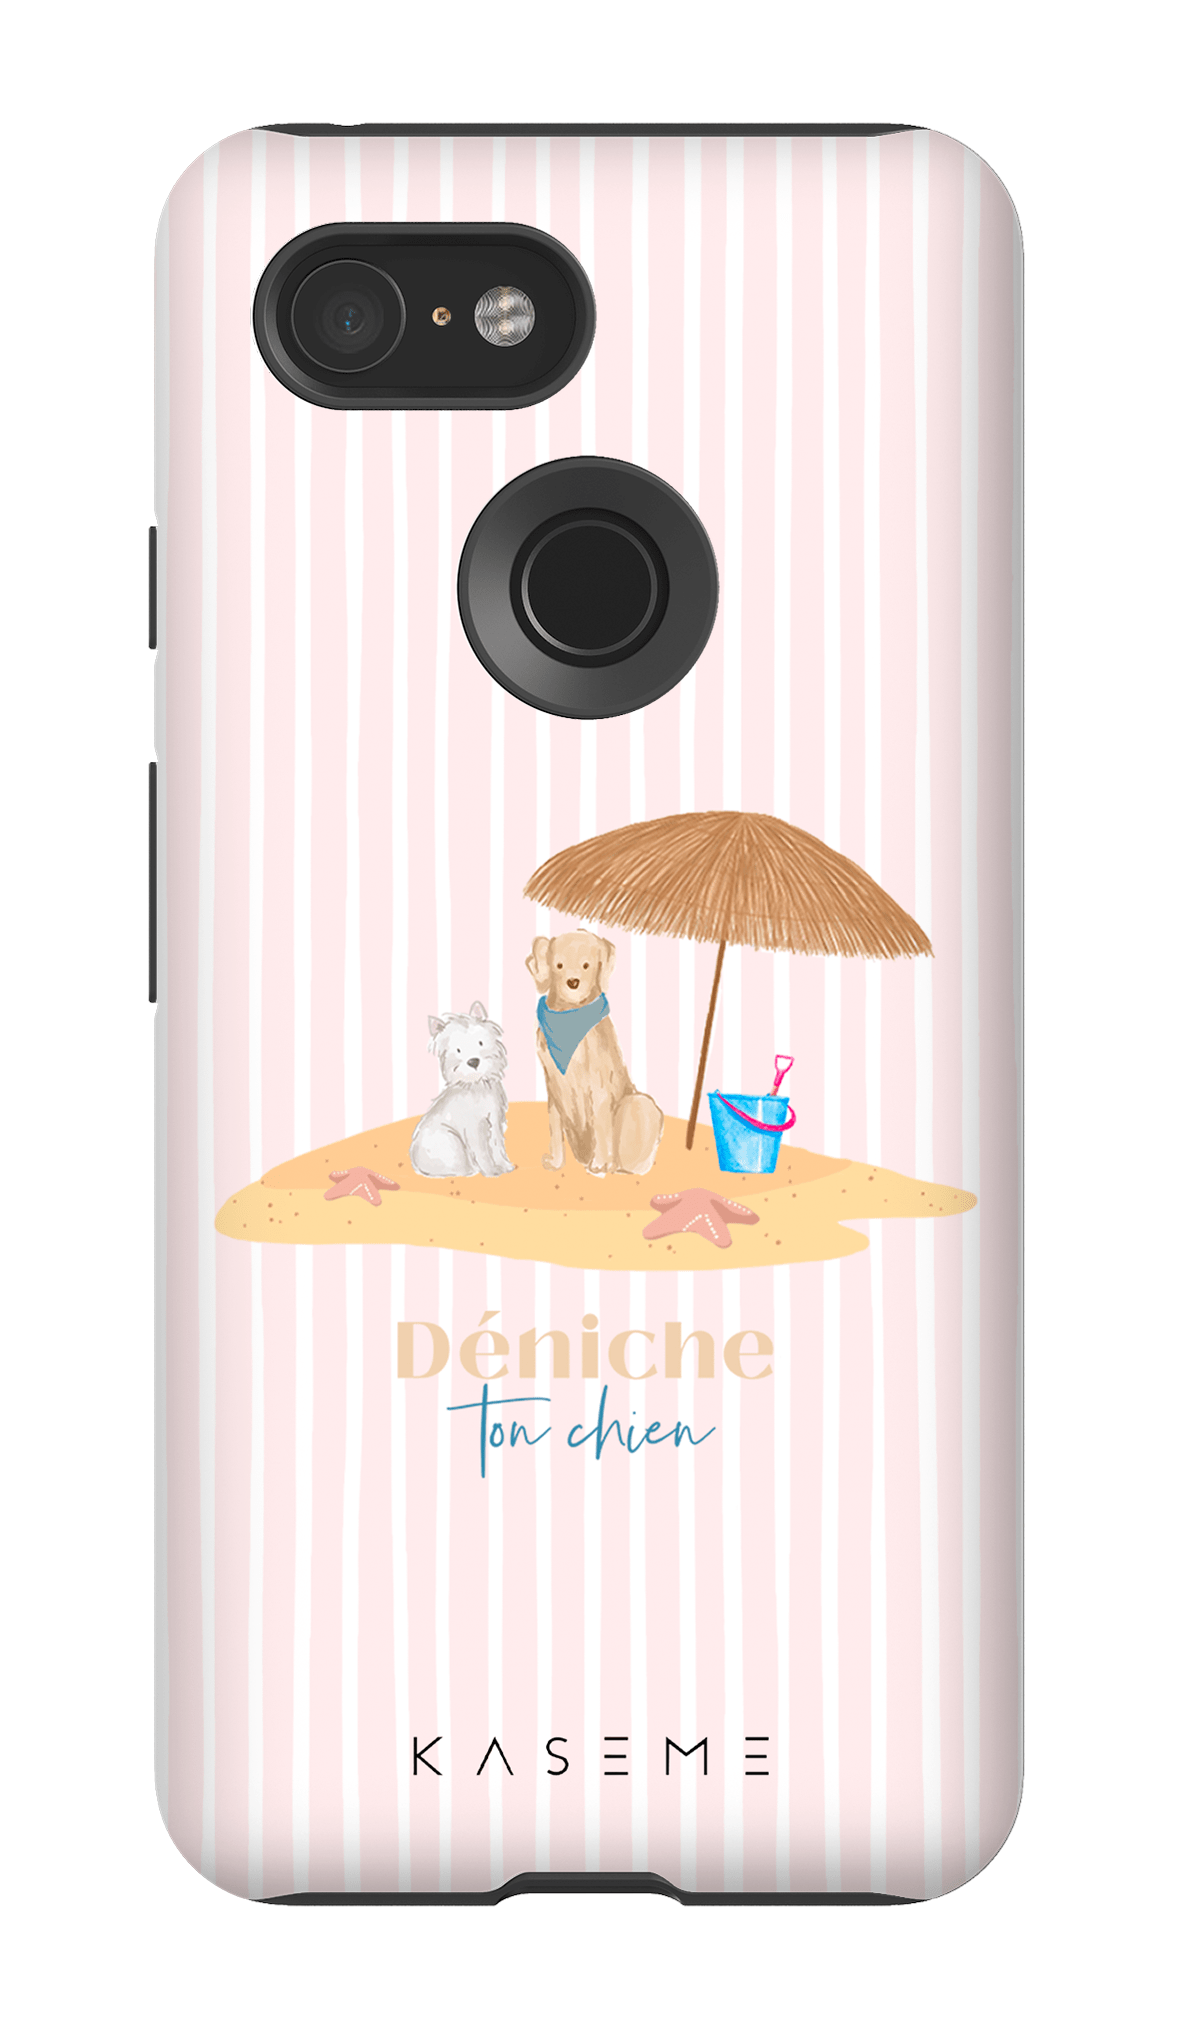 Dogs On Vacay Mode Pink by Déniche Ton Chien - Google Pixel 3